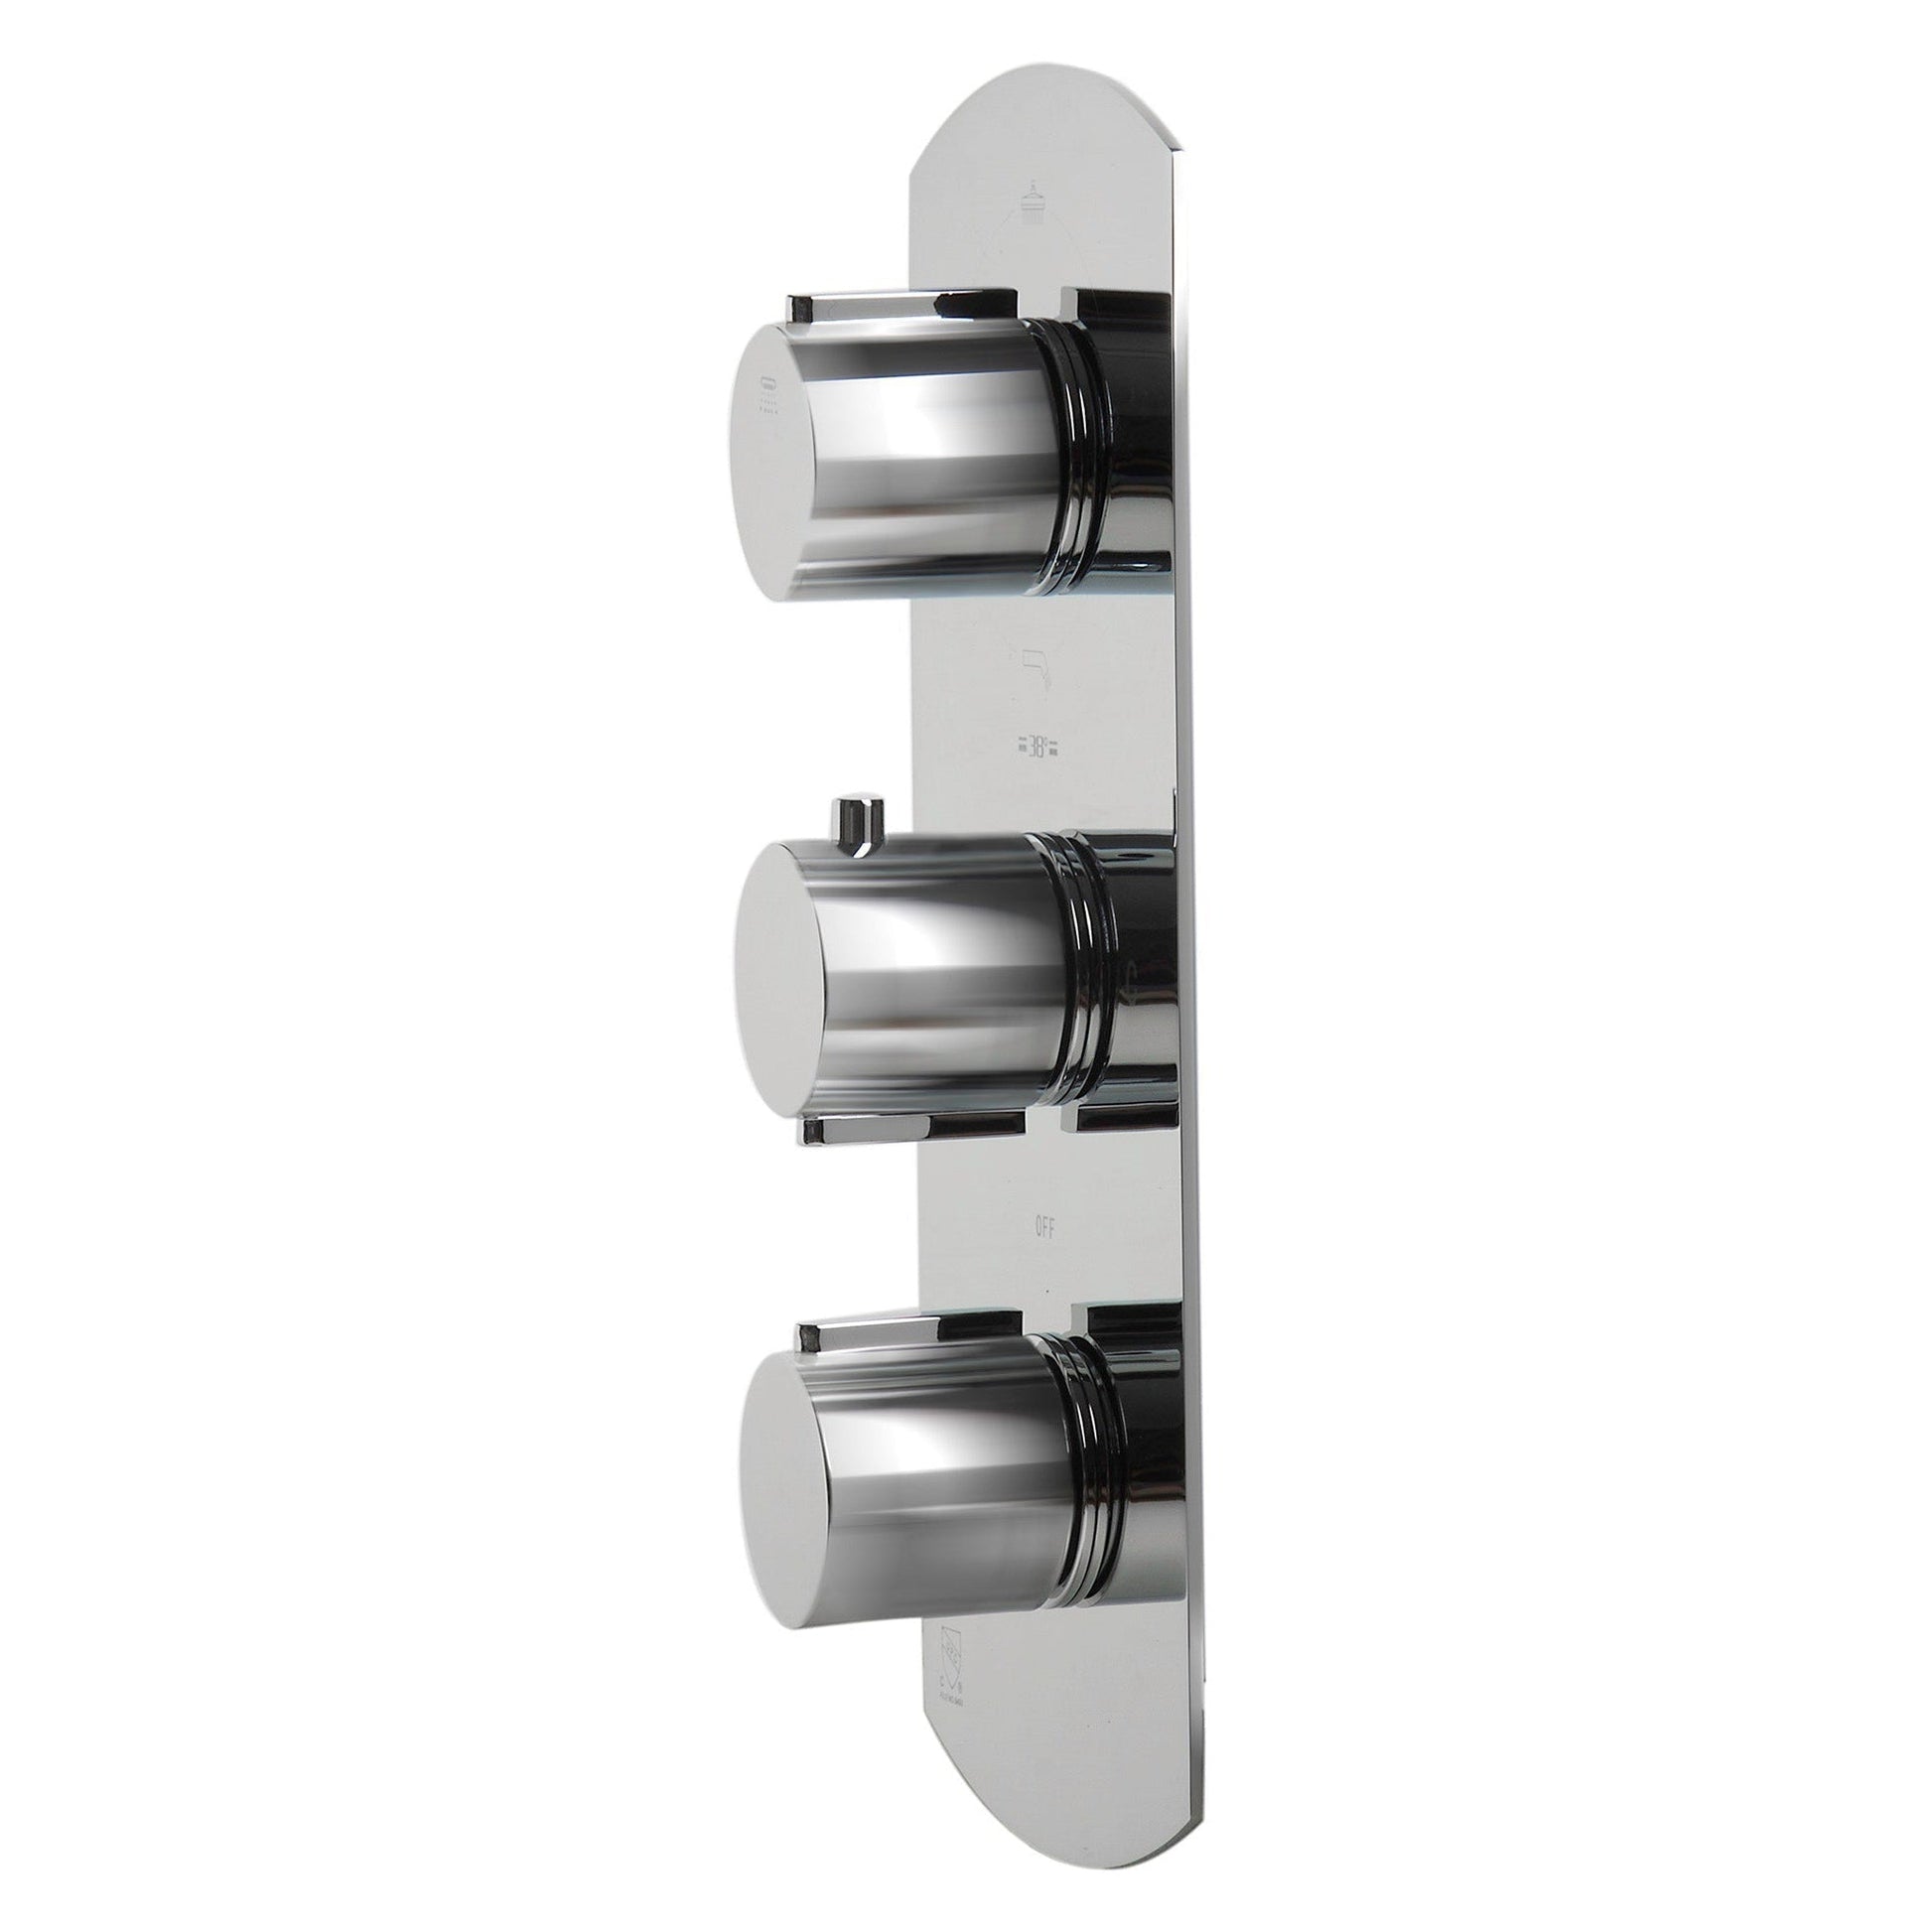 ALFI Brand AB4101-PC Polished Chrome Concealed 4-Way Thermostatic Valve Shower Mixer With Round Knobs